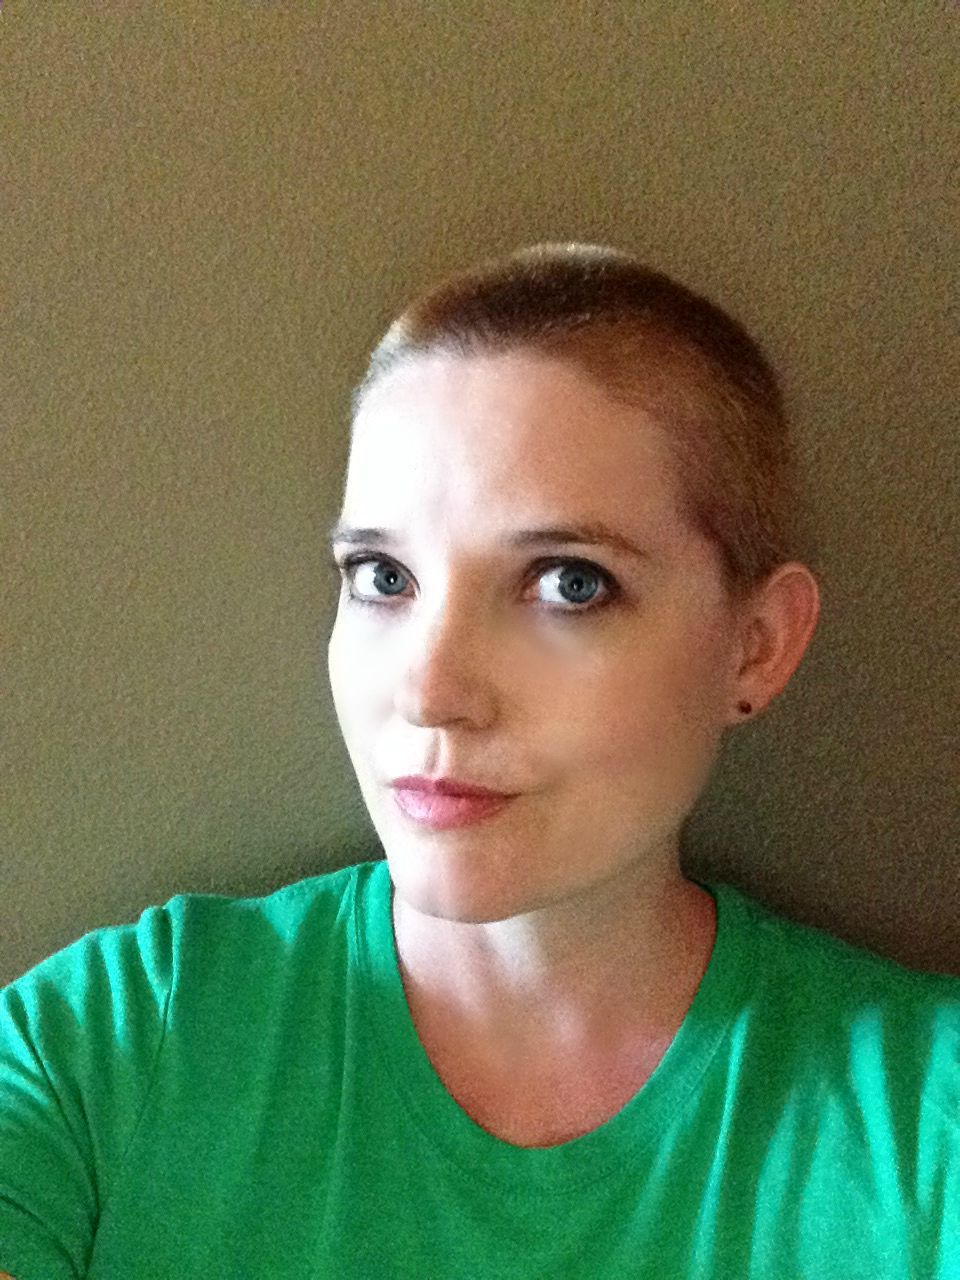 Tribune reccomend Shaved her hair off